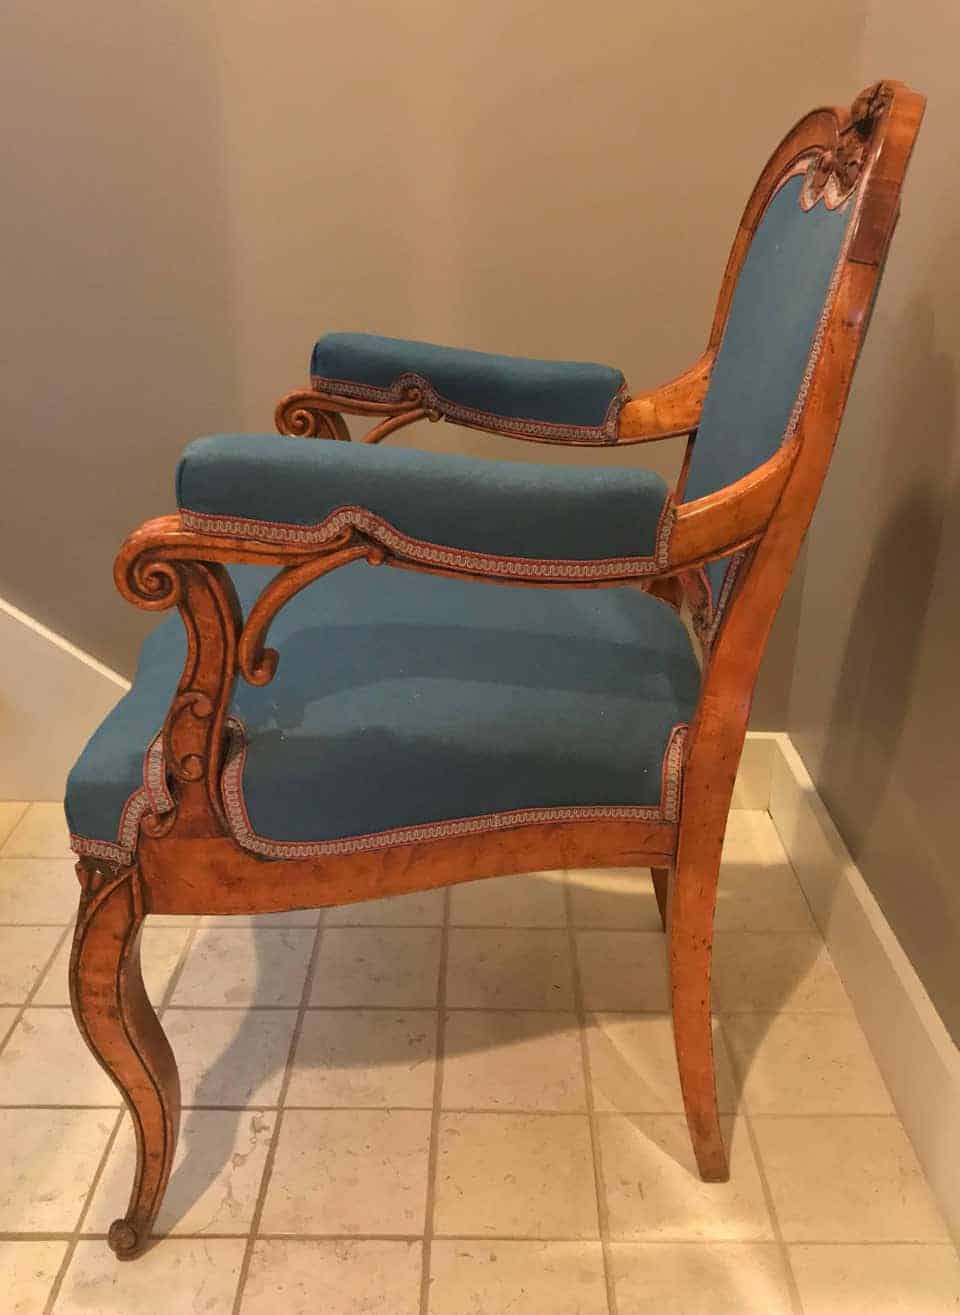 French 19th century Louis XV arm chair with blue upholstery.